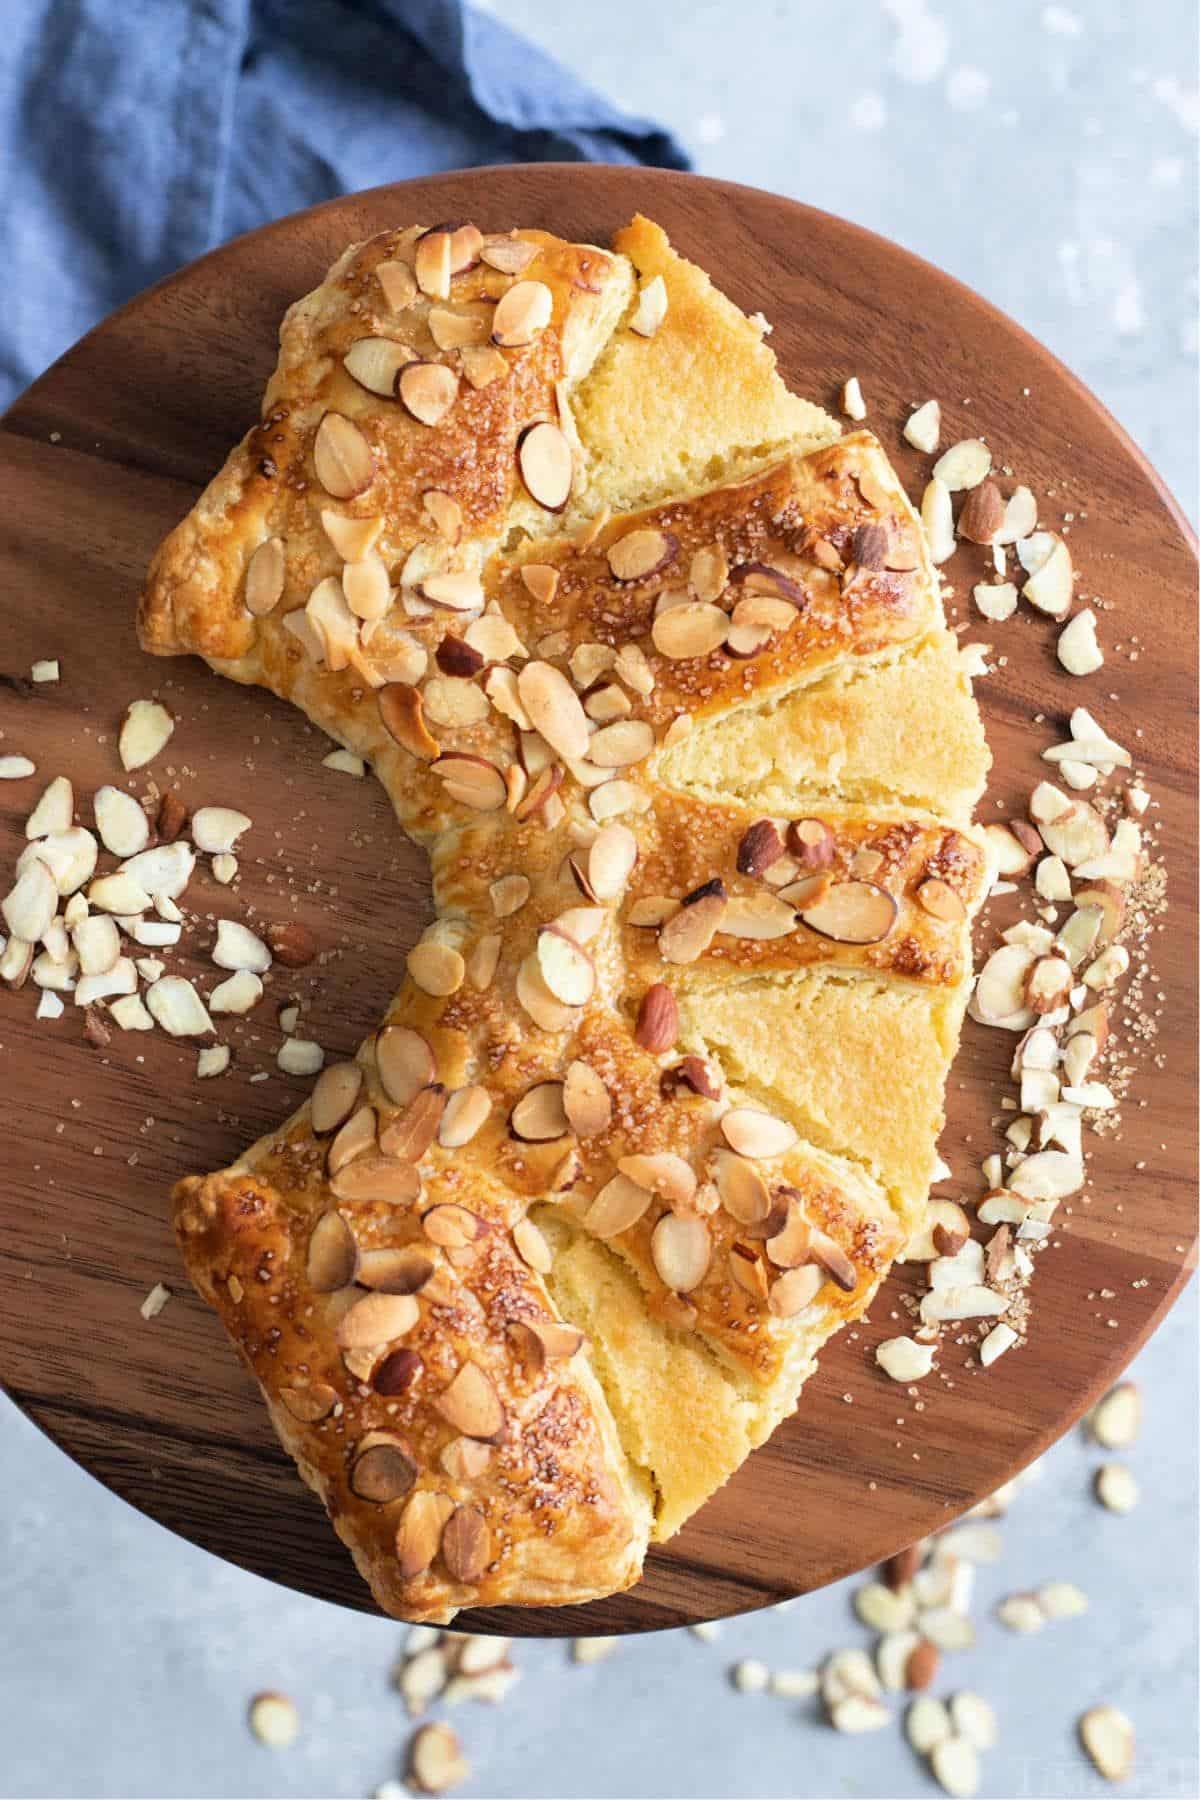 Almond bear claw on a wooden tray.